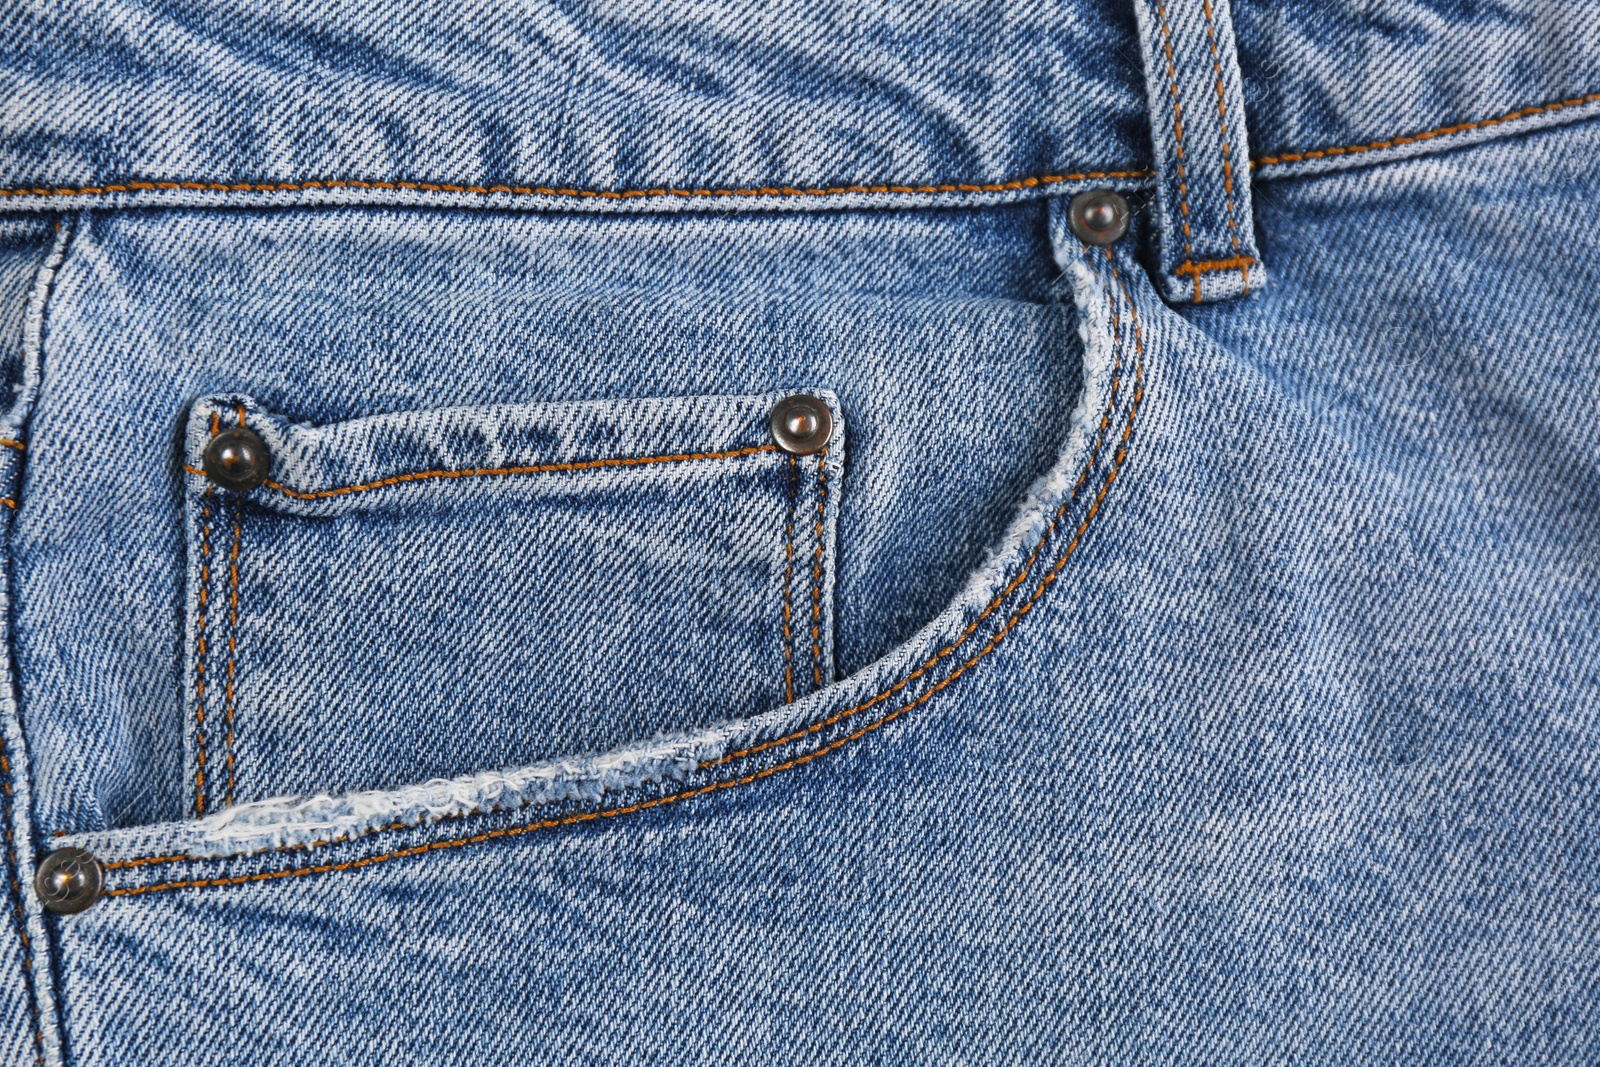 Photo of Light blue jeans with inset pocket as background, closeup